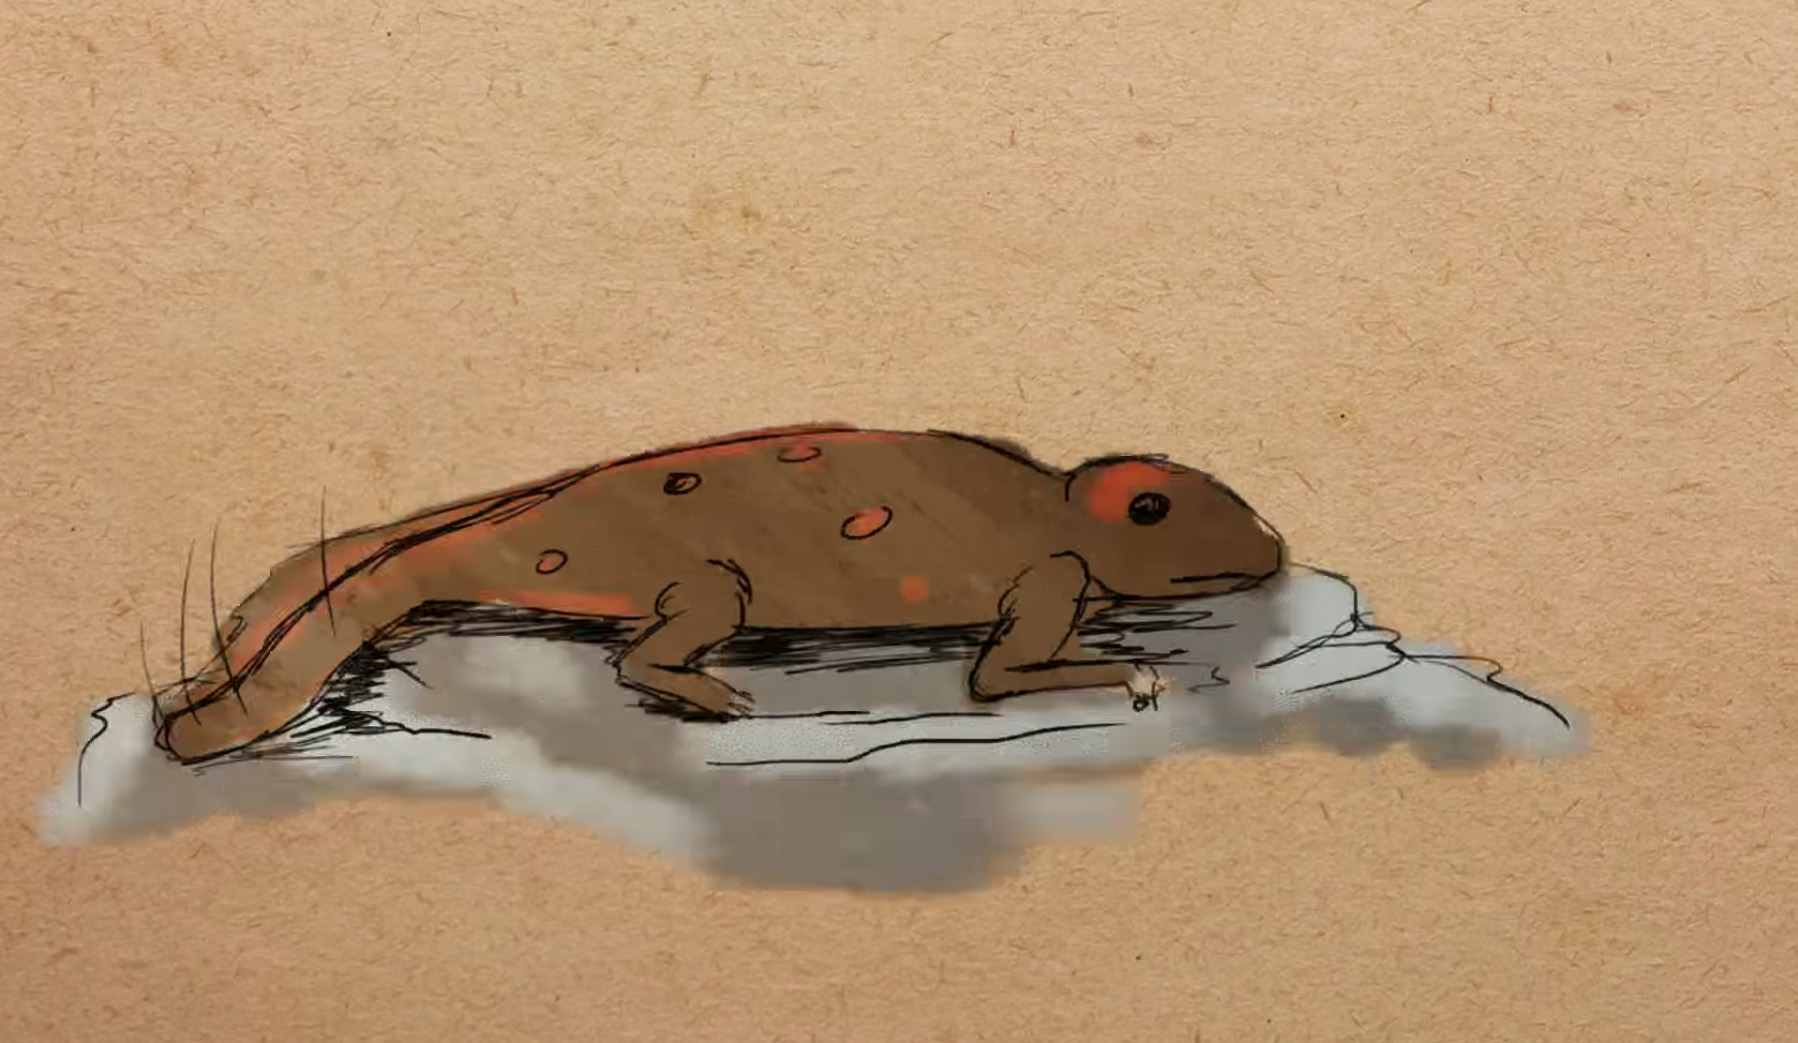 Illustration of an extinct yunnan lake newt. It's dark brown with red-orange patches.